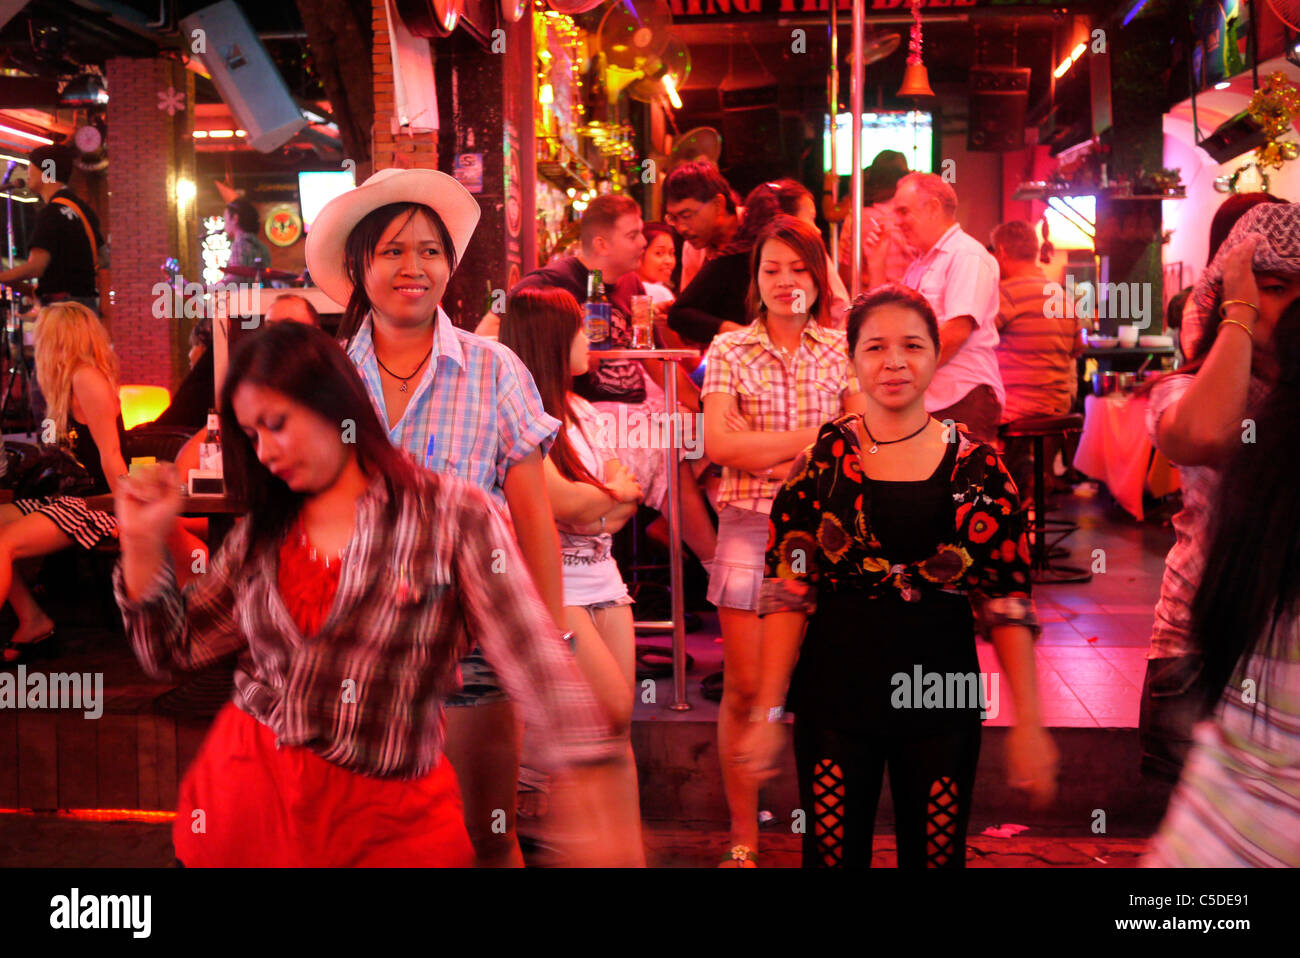 THAILAND Pattaya Beach Resort And Centre For Sex Tourism Prostitutes Outside A Bar Photo By